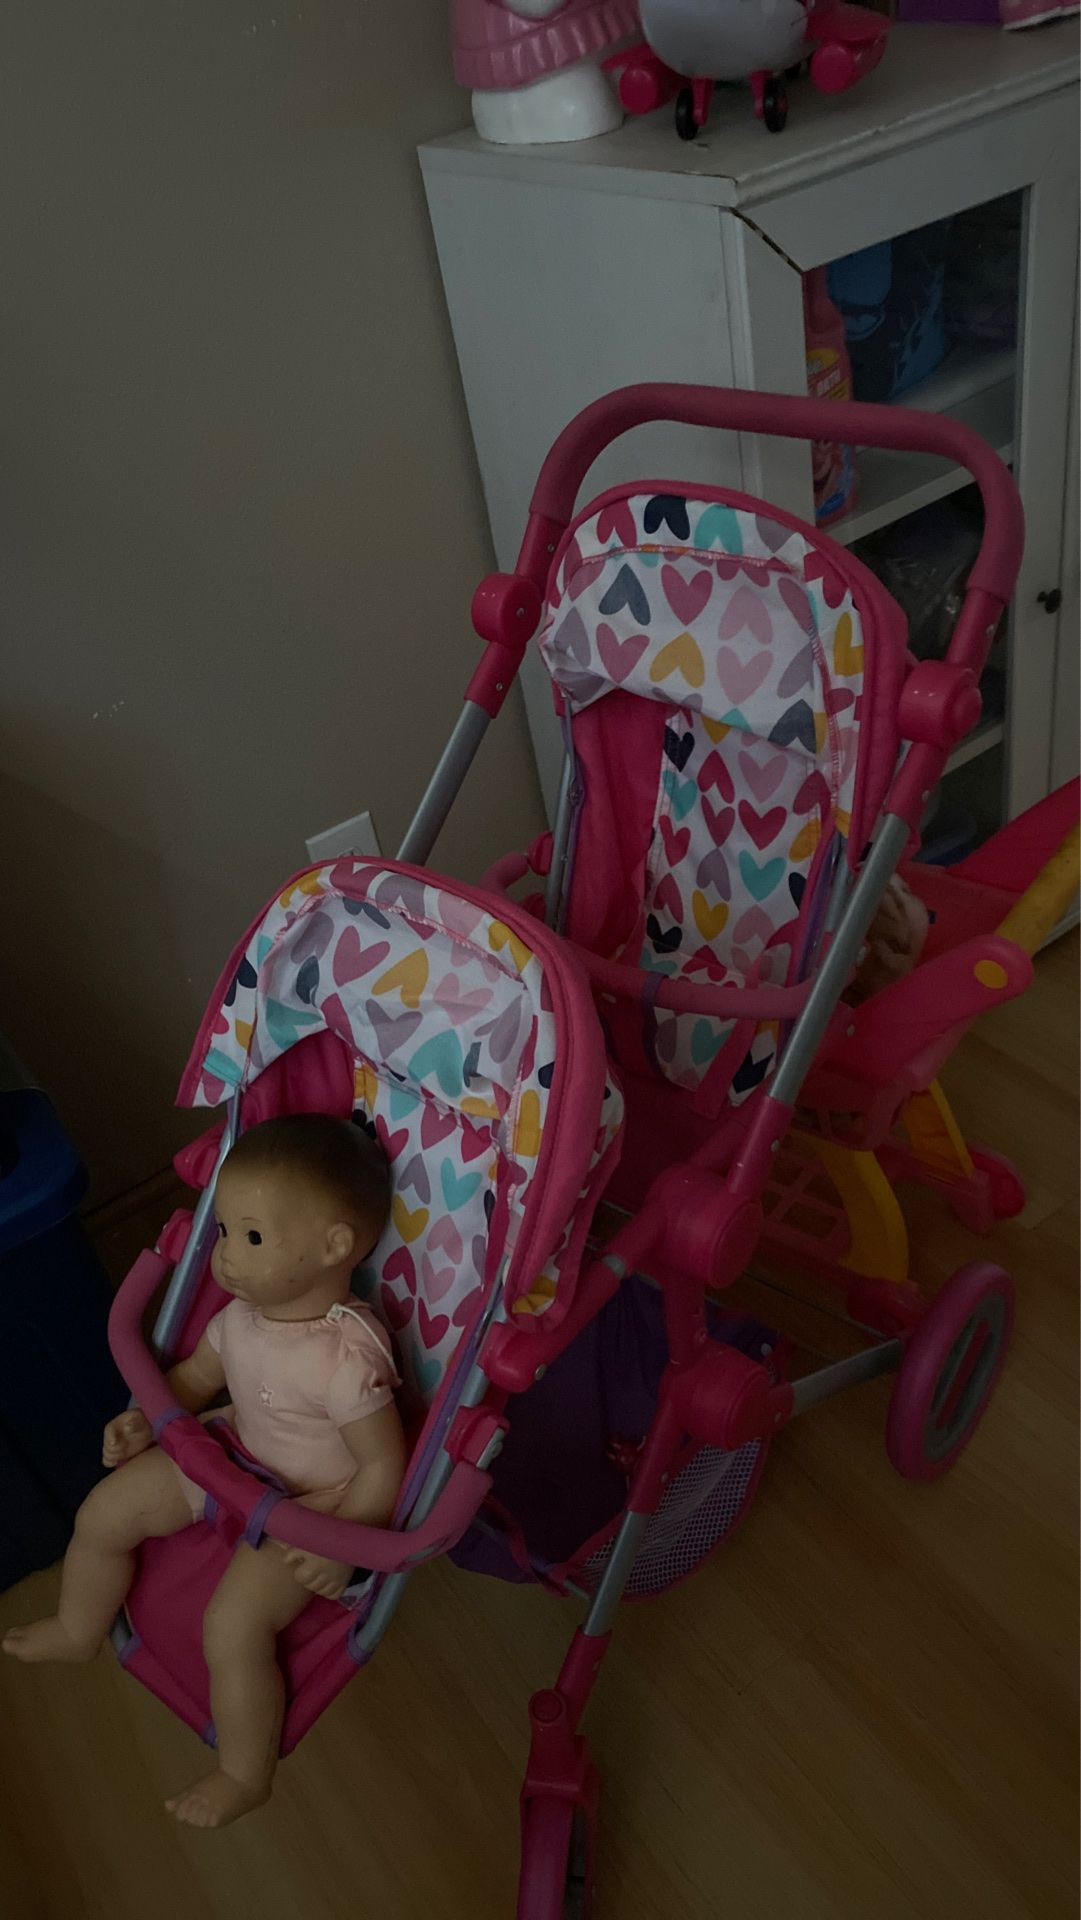 Double stroller toy for two dolls